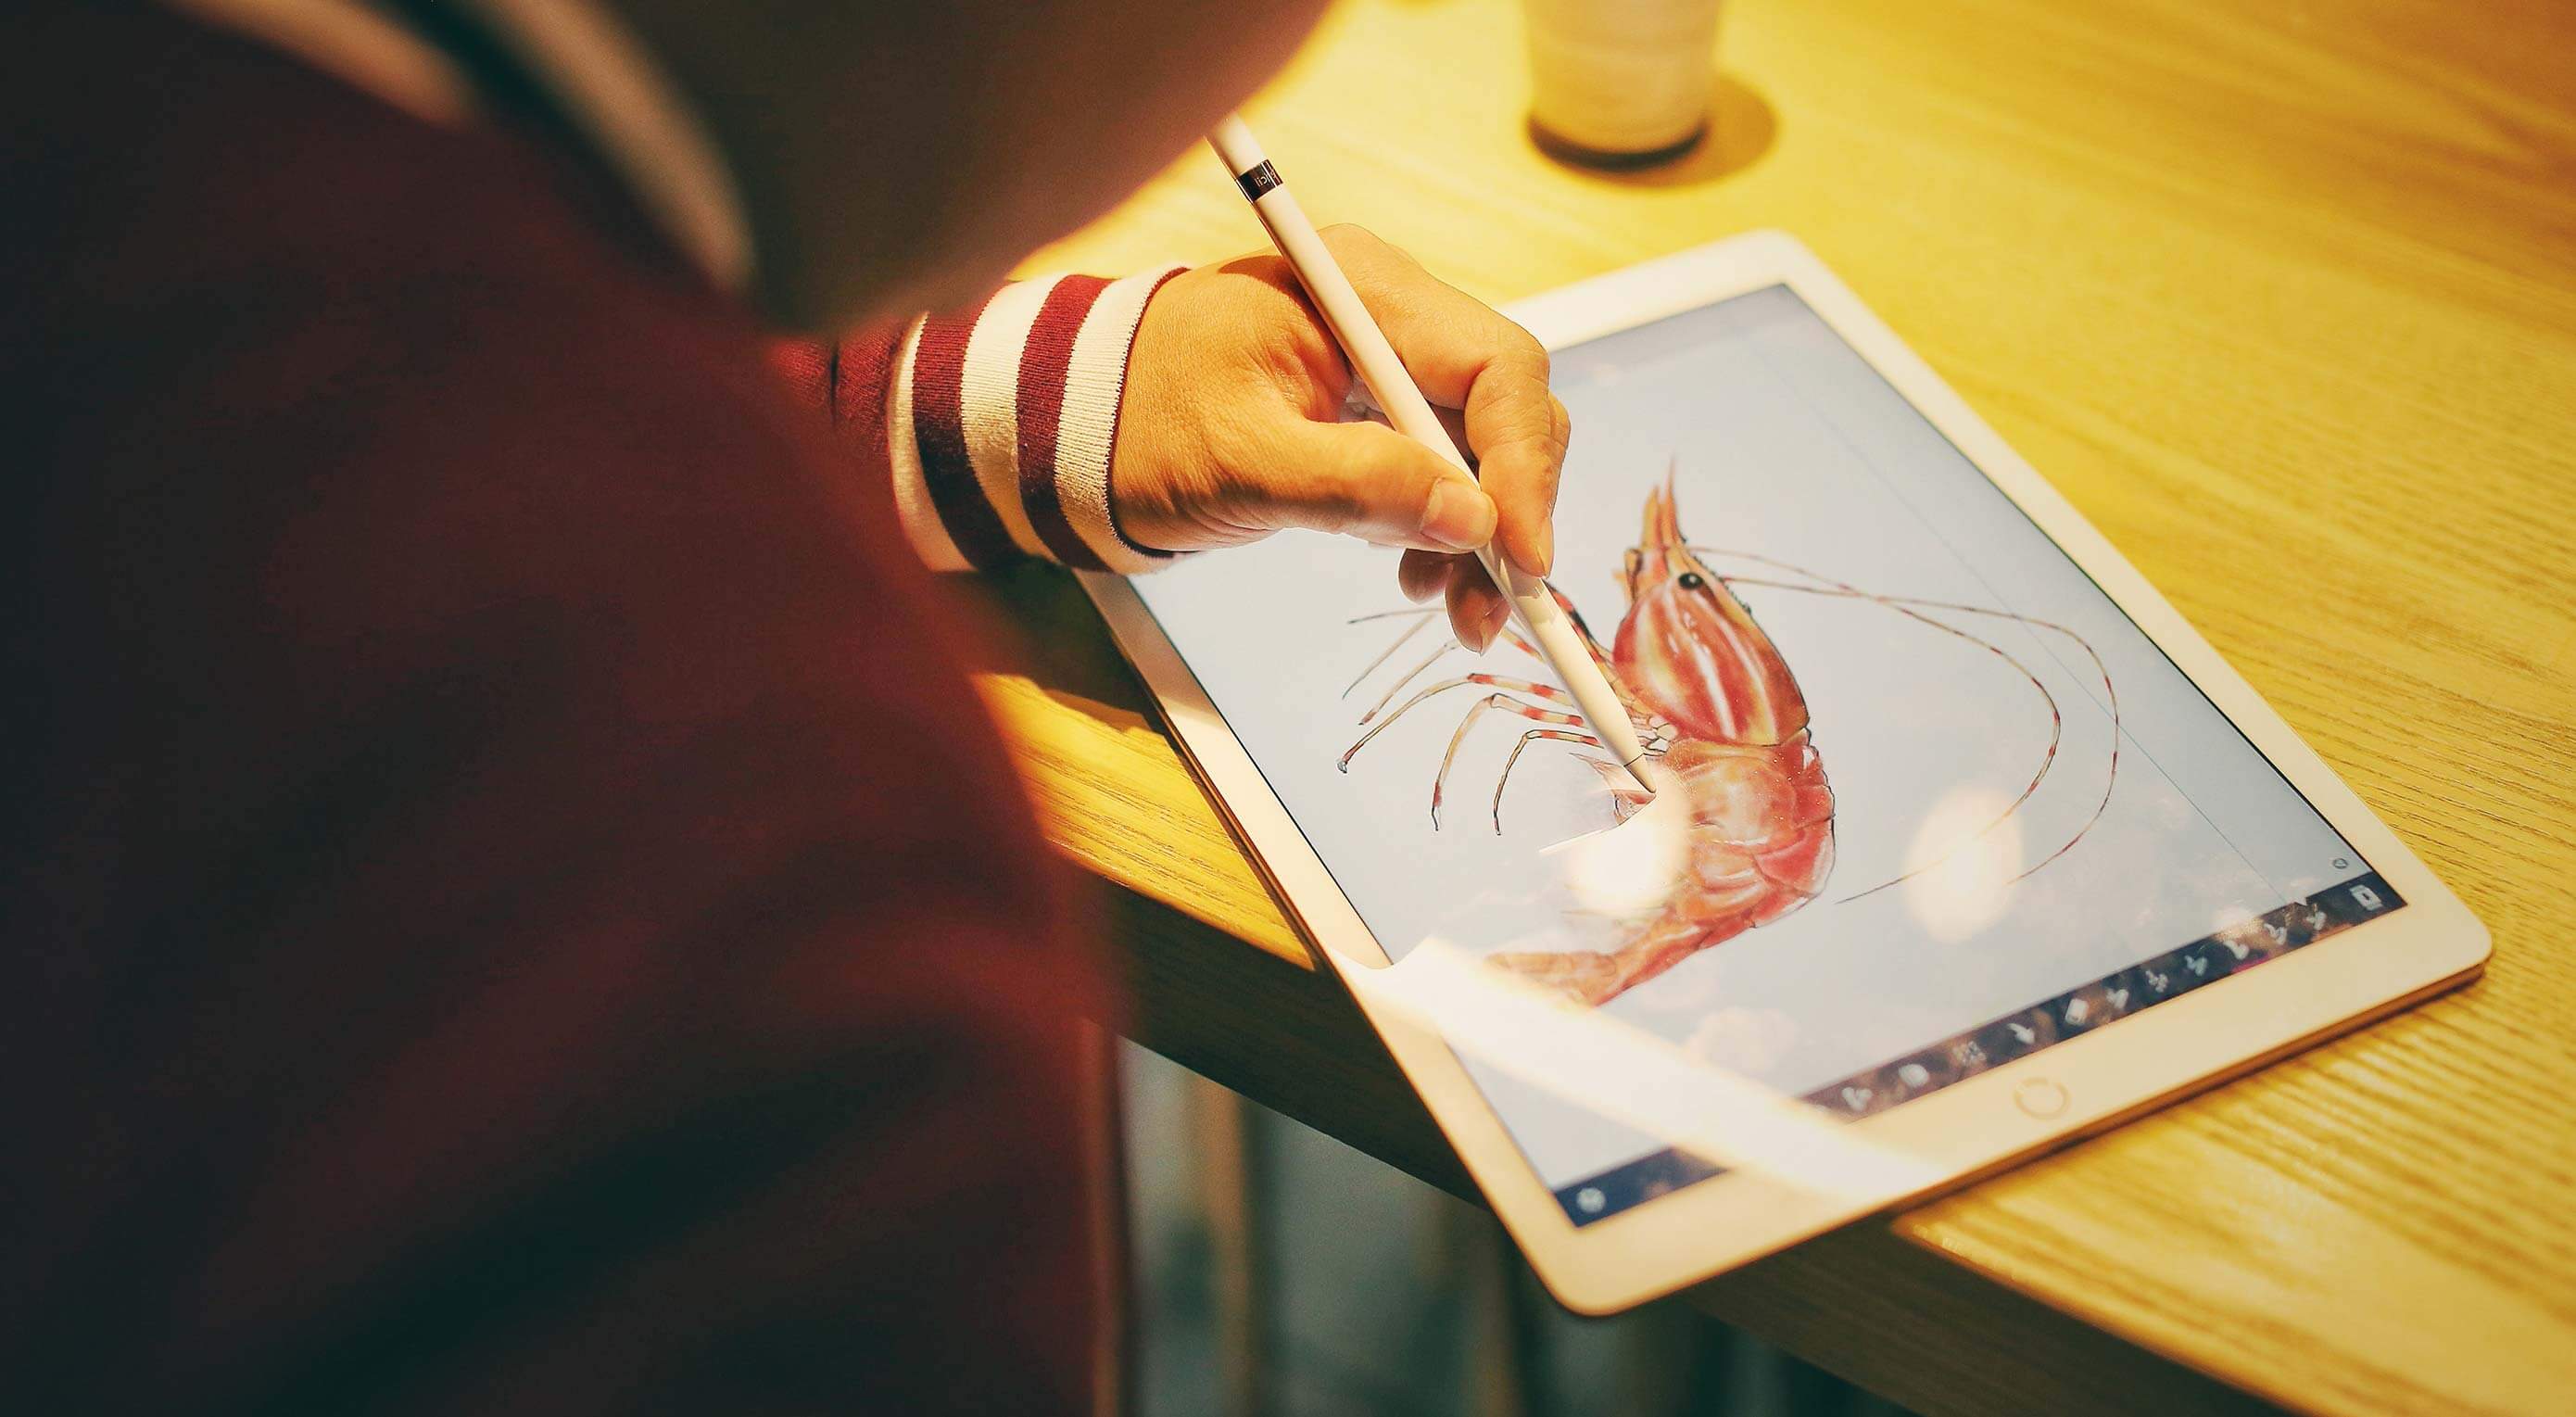 best free drawing apps online